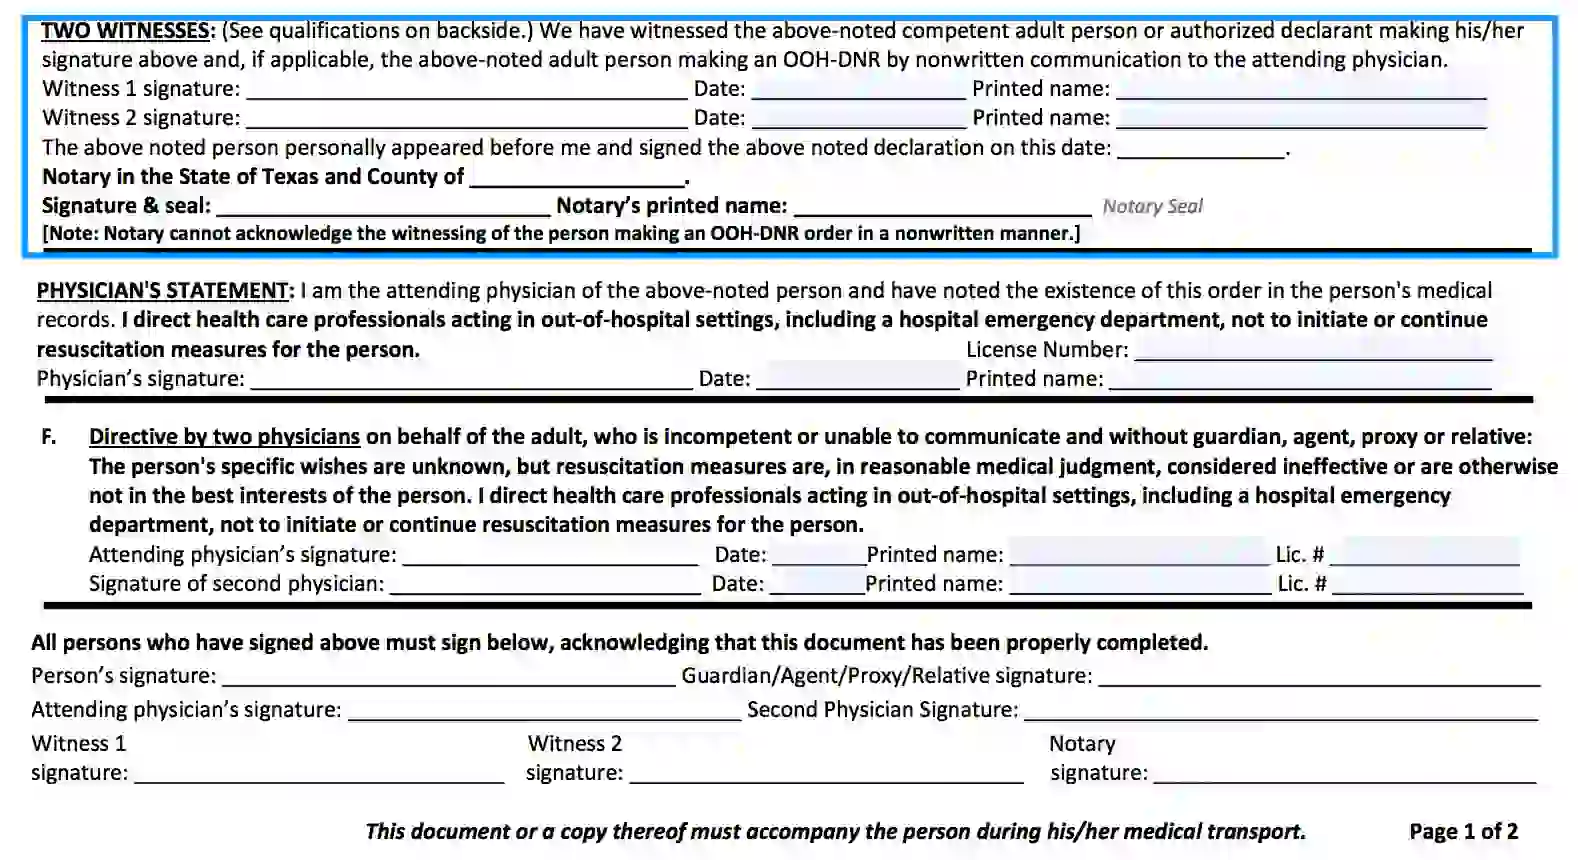 step 3 to filling out the texas dnr form - make witnesses sign the document